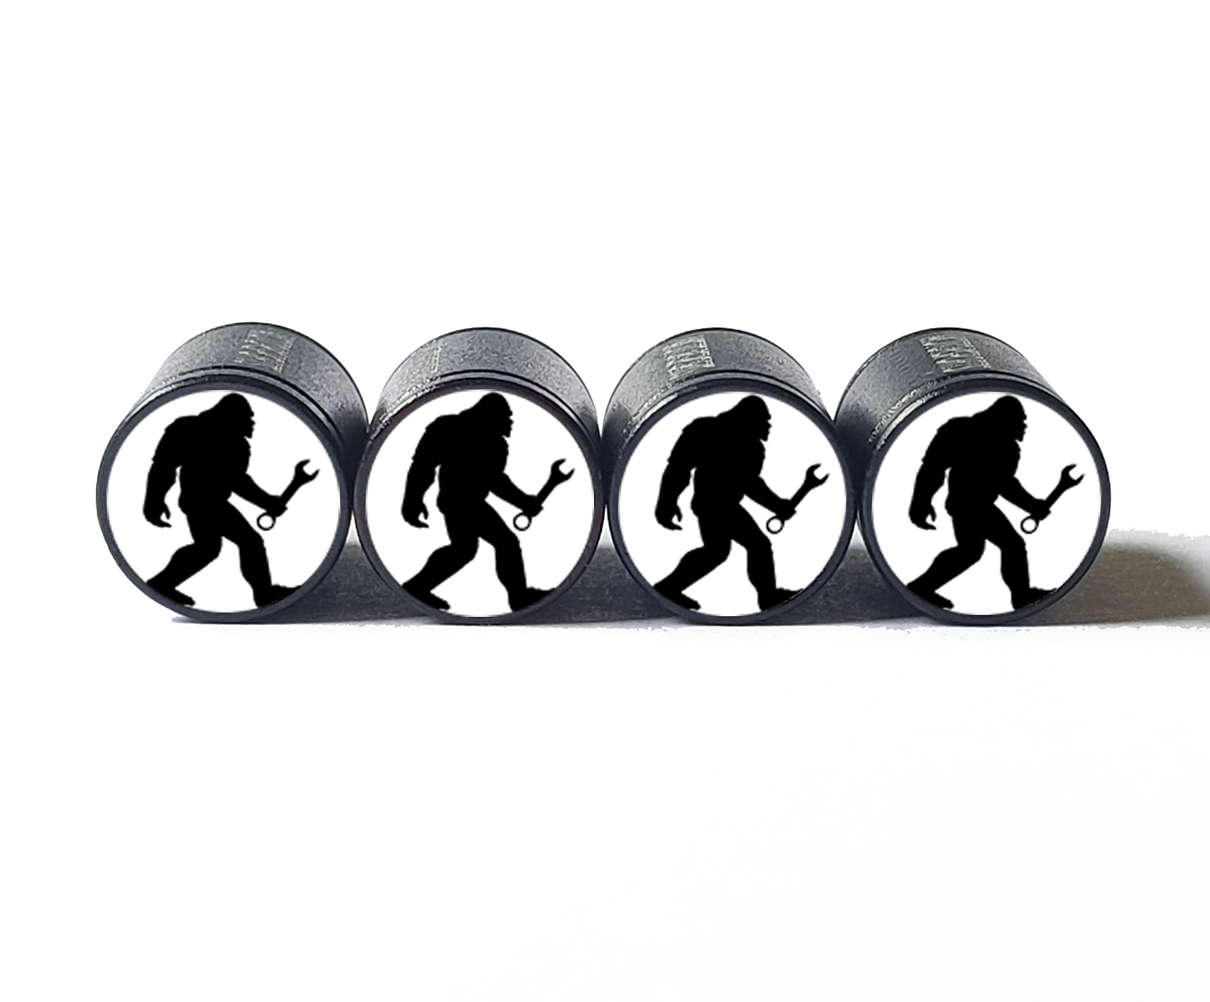 Primary image for Bigfoot with Wrench Tire Valve Caps - Black Aluminum - Set of Four